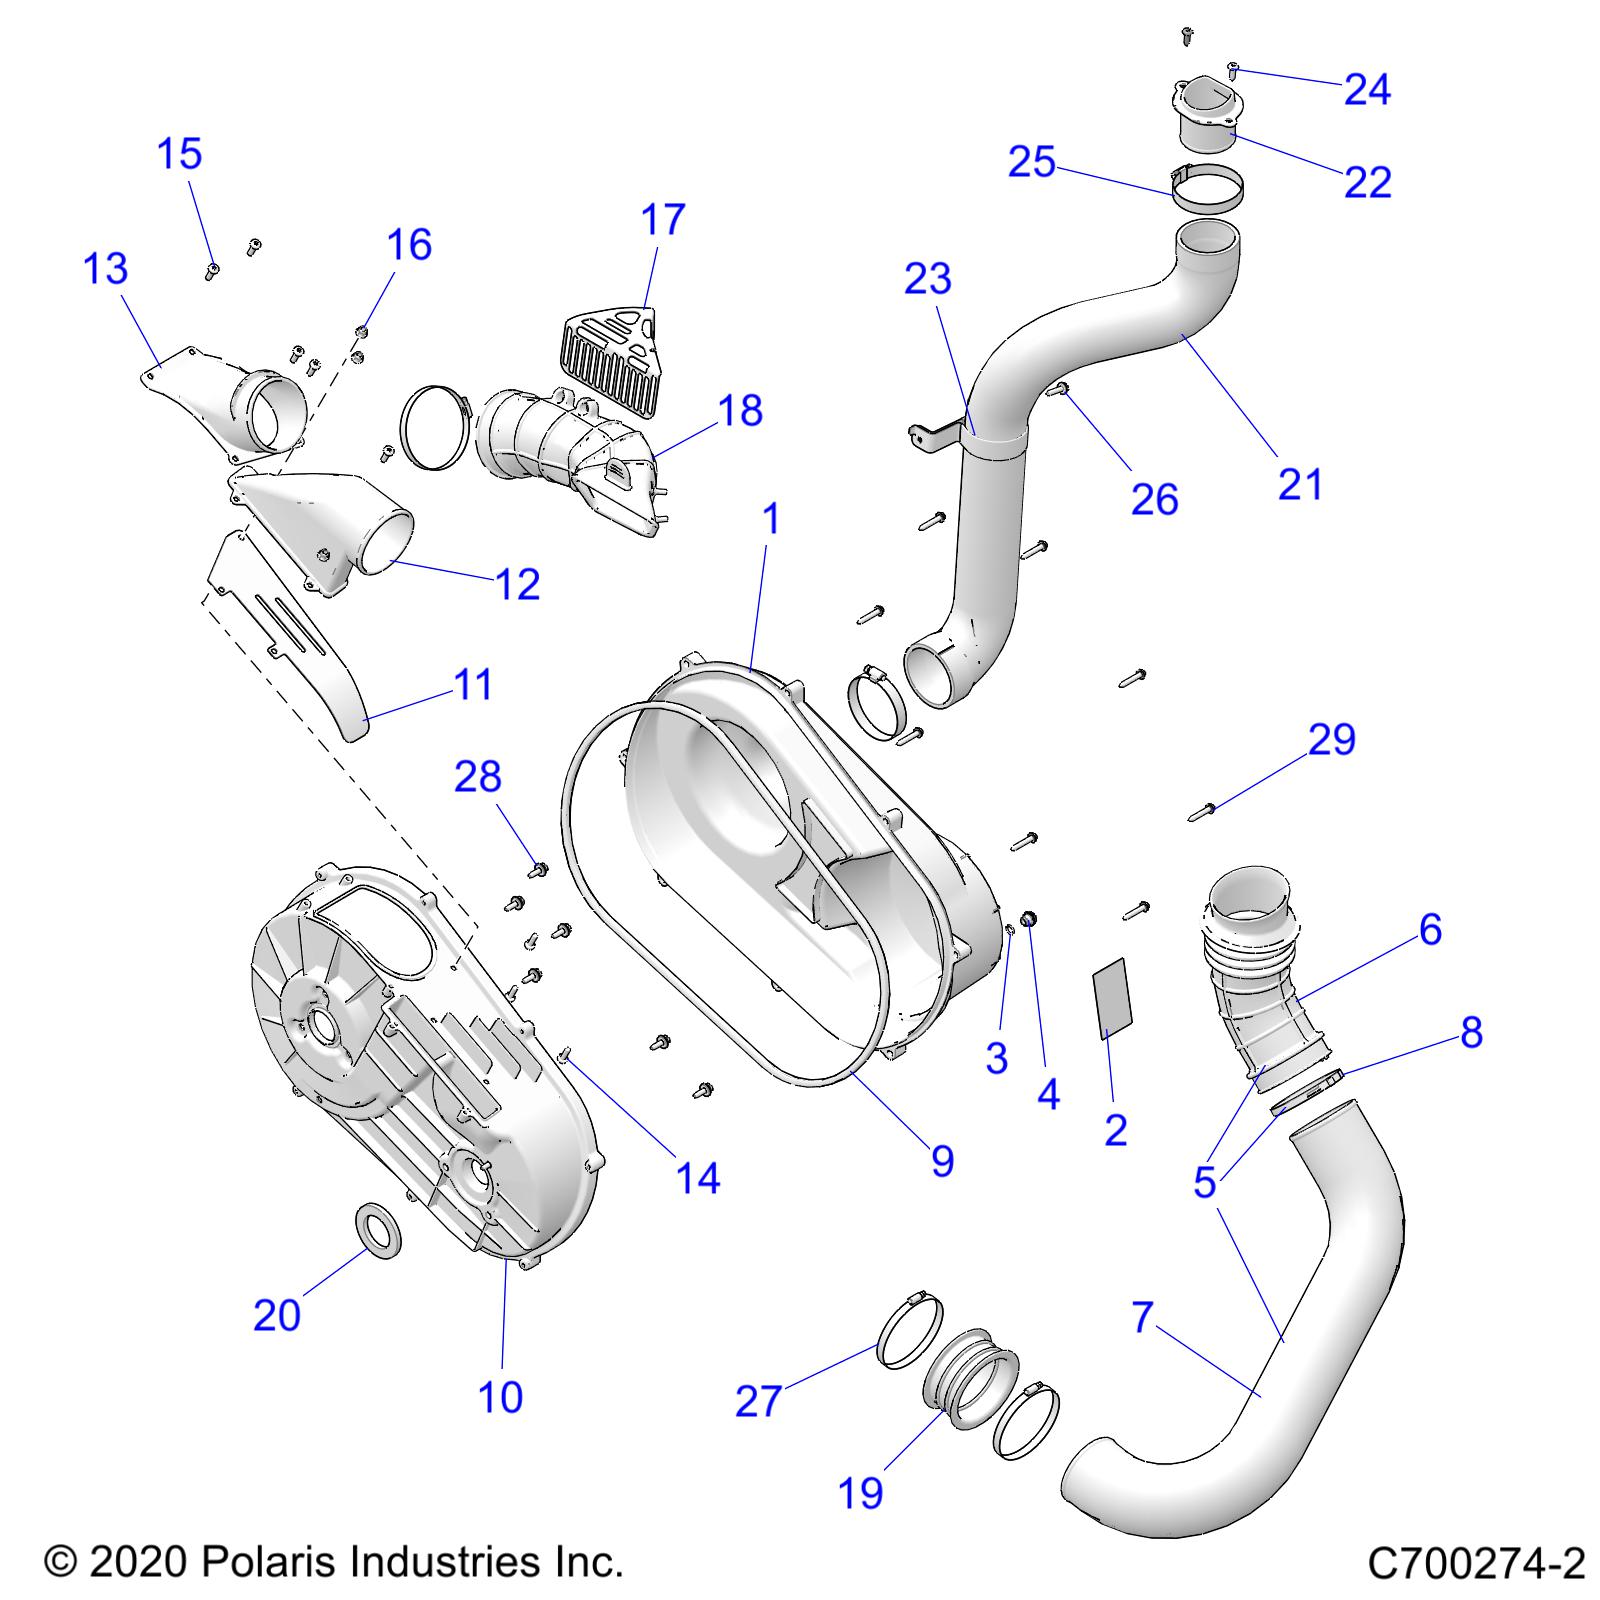 Part Number : 1240782 CLUTCH DUCT INTAKE ASSEMBLY